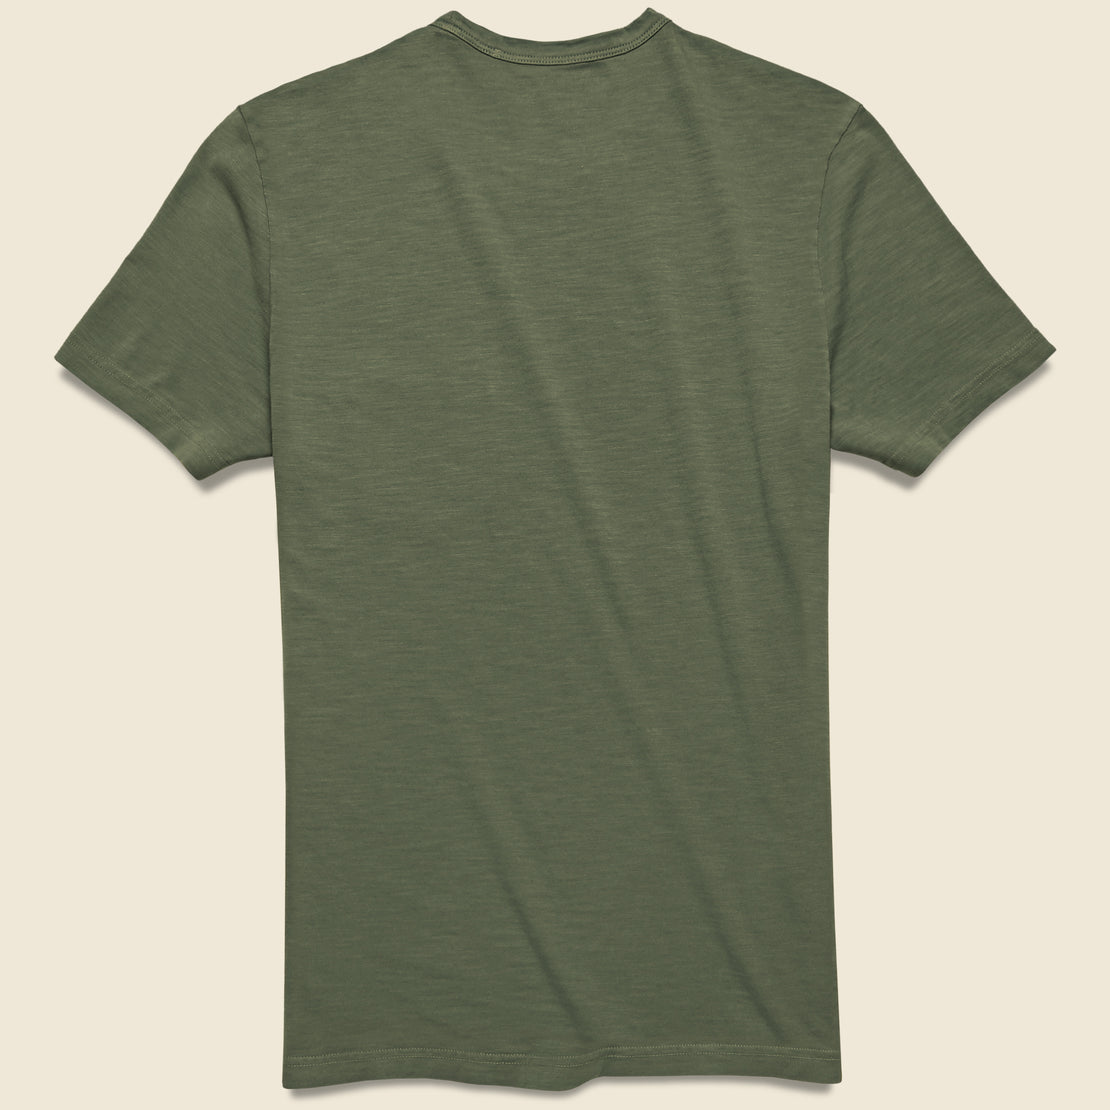 Garment Dyed Pocket Tee - Olive - Faherty - STAG Provisions - Tops - S/S Tee